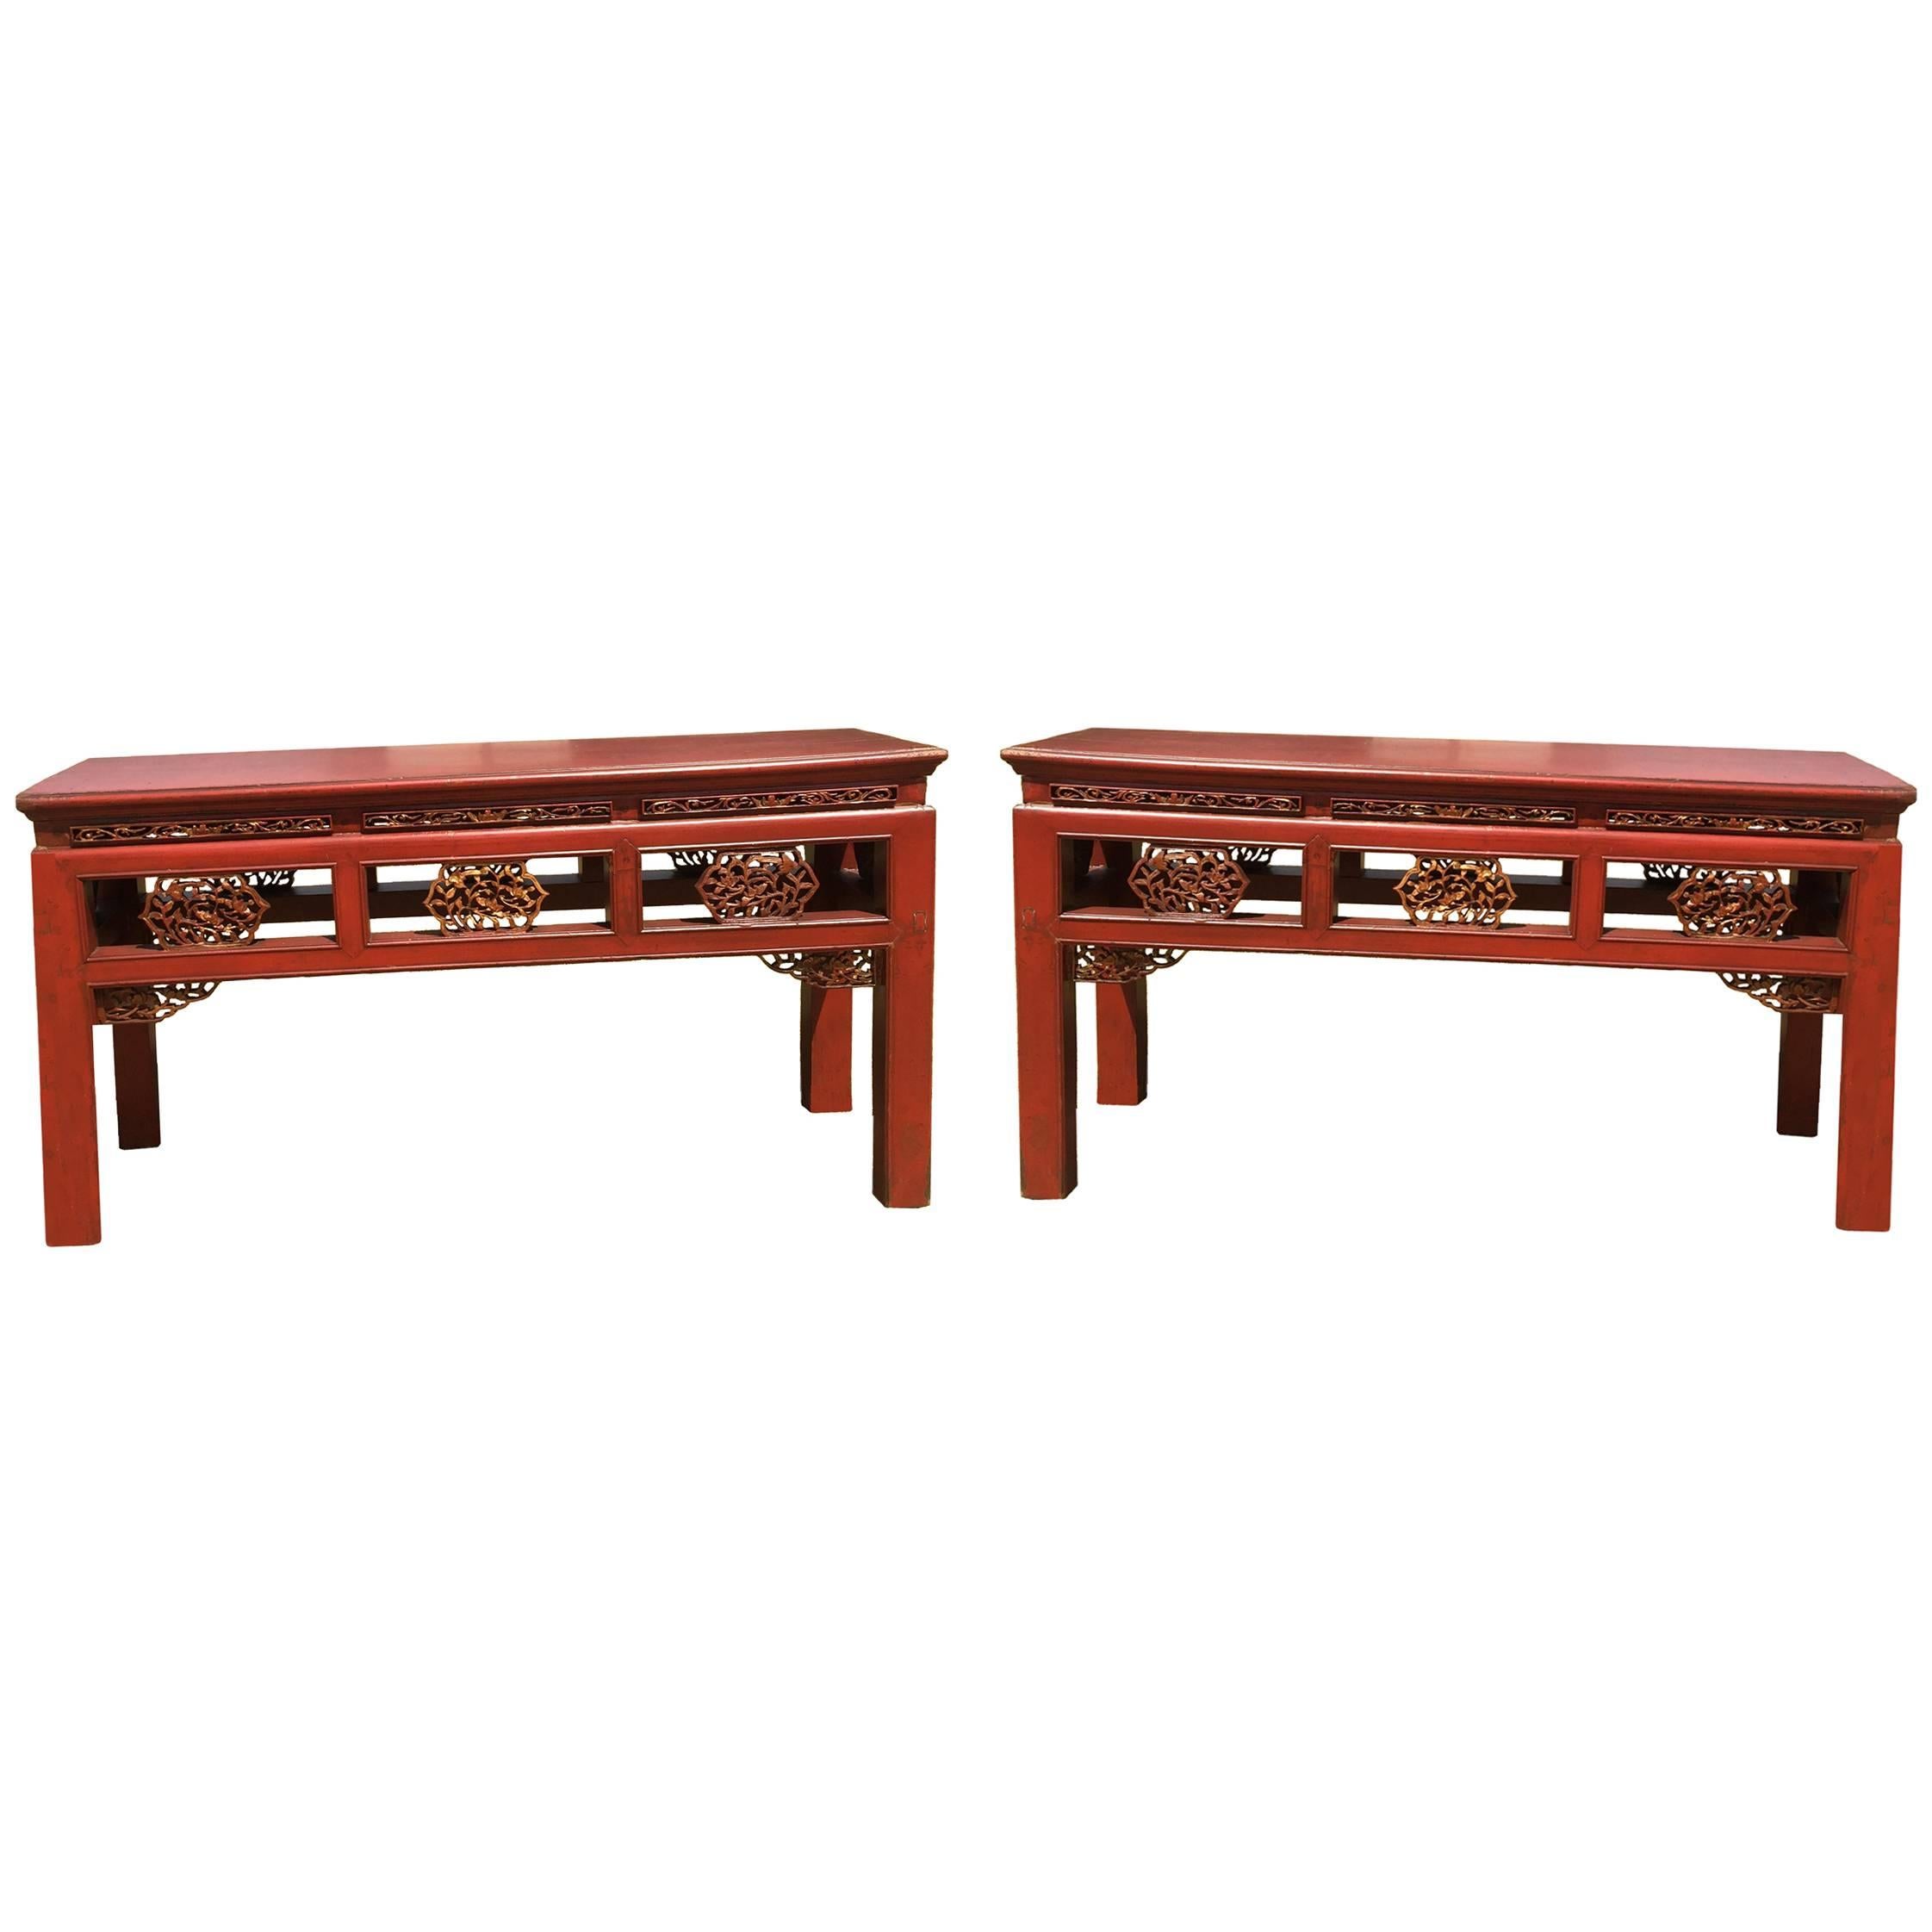 Pair Finely Carved Antique Red Benches, Chinese 19th Century, Gilded